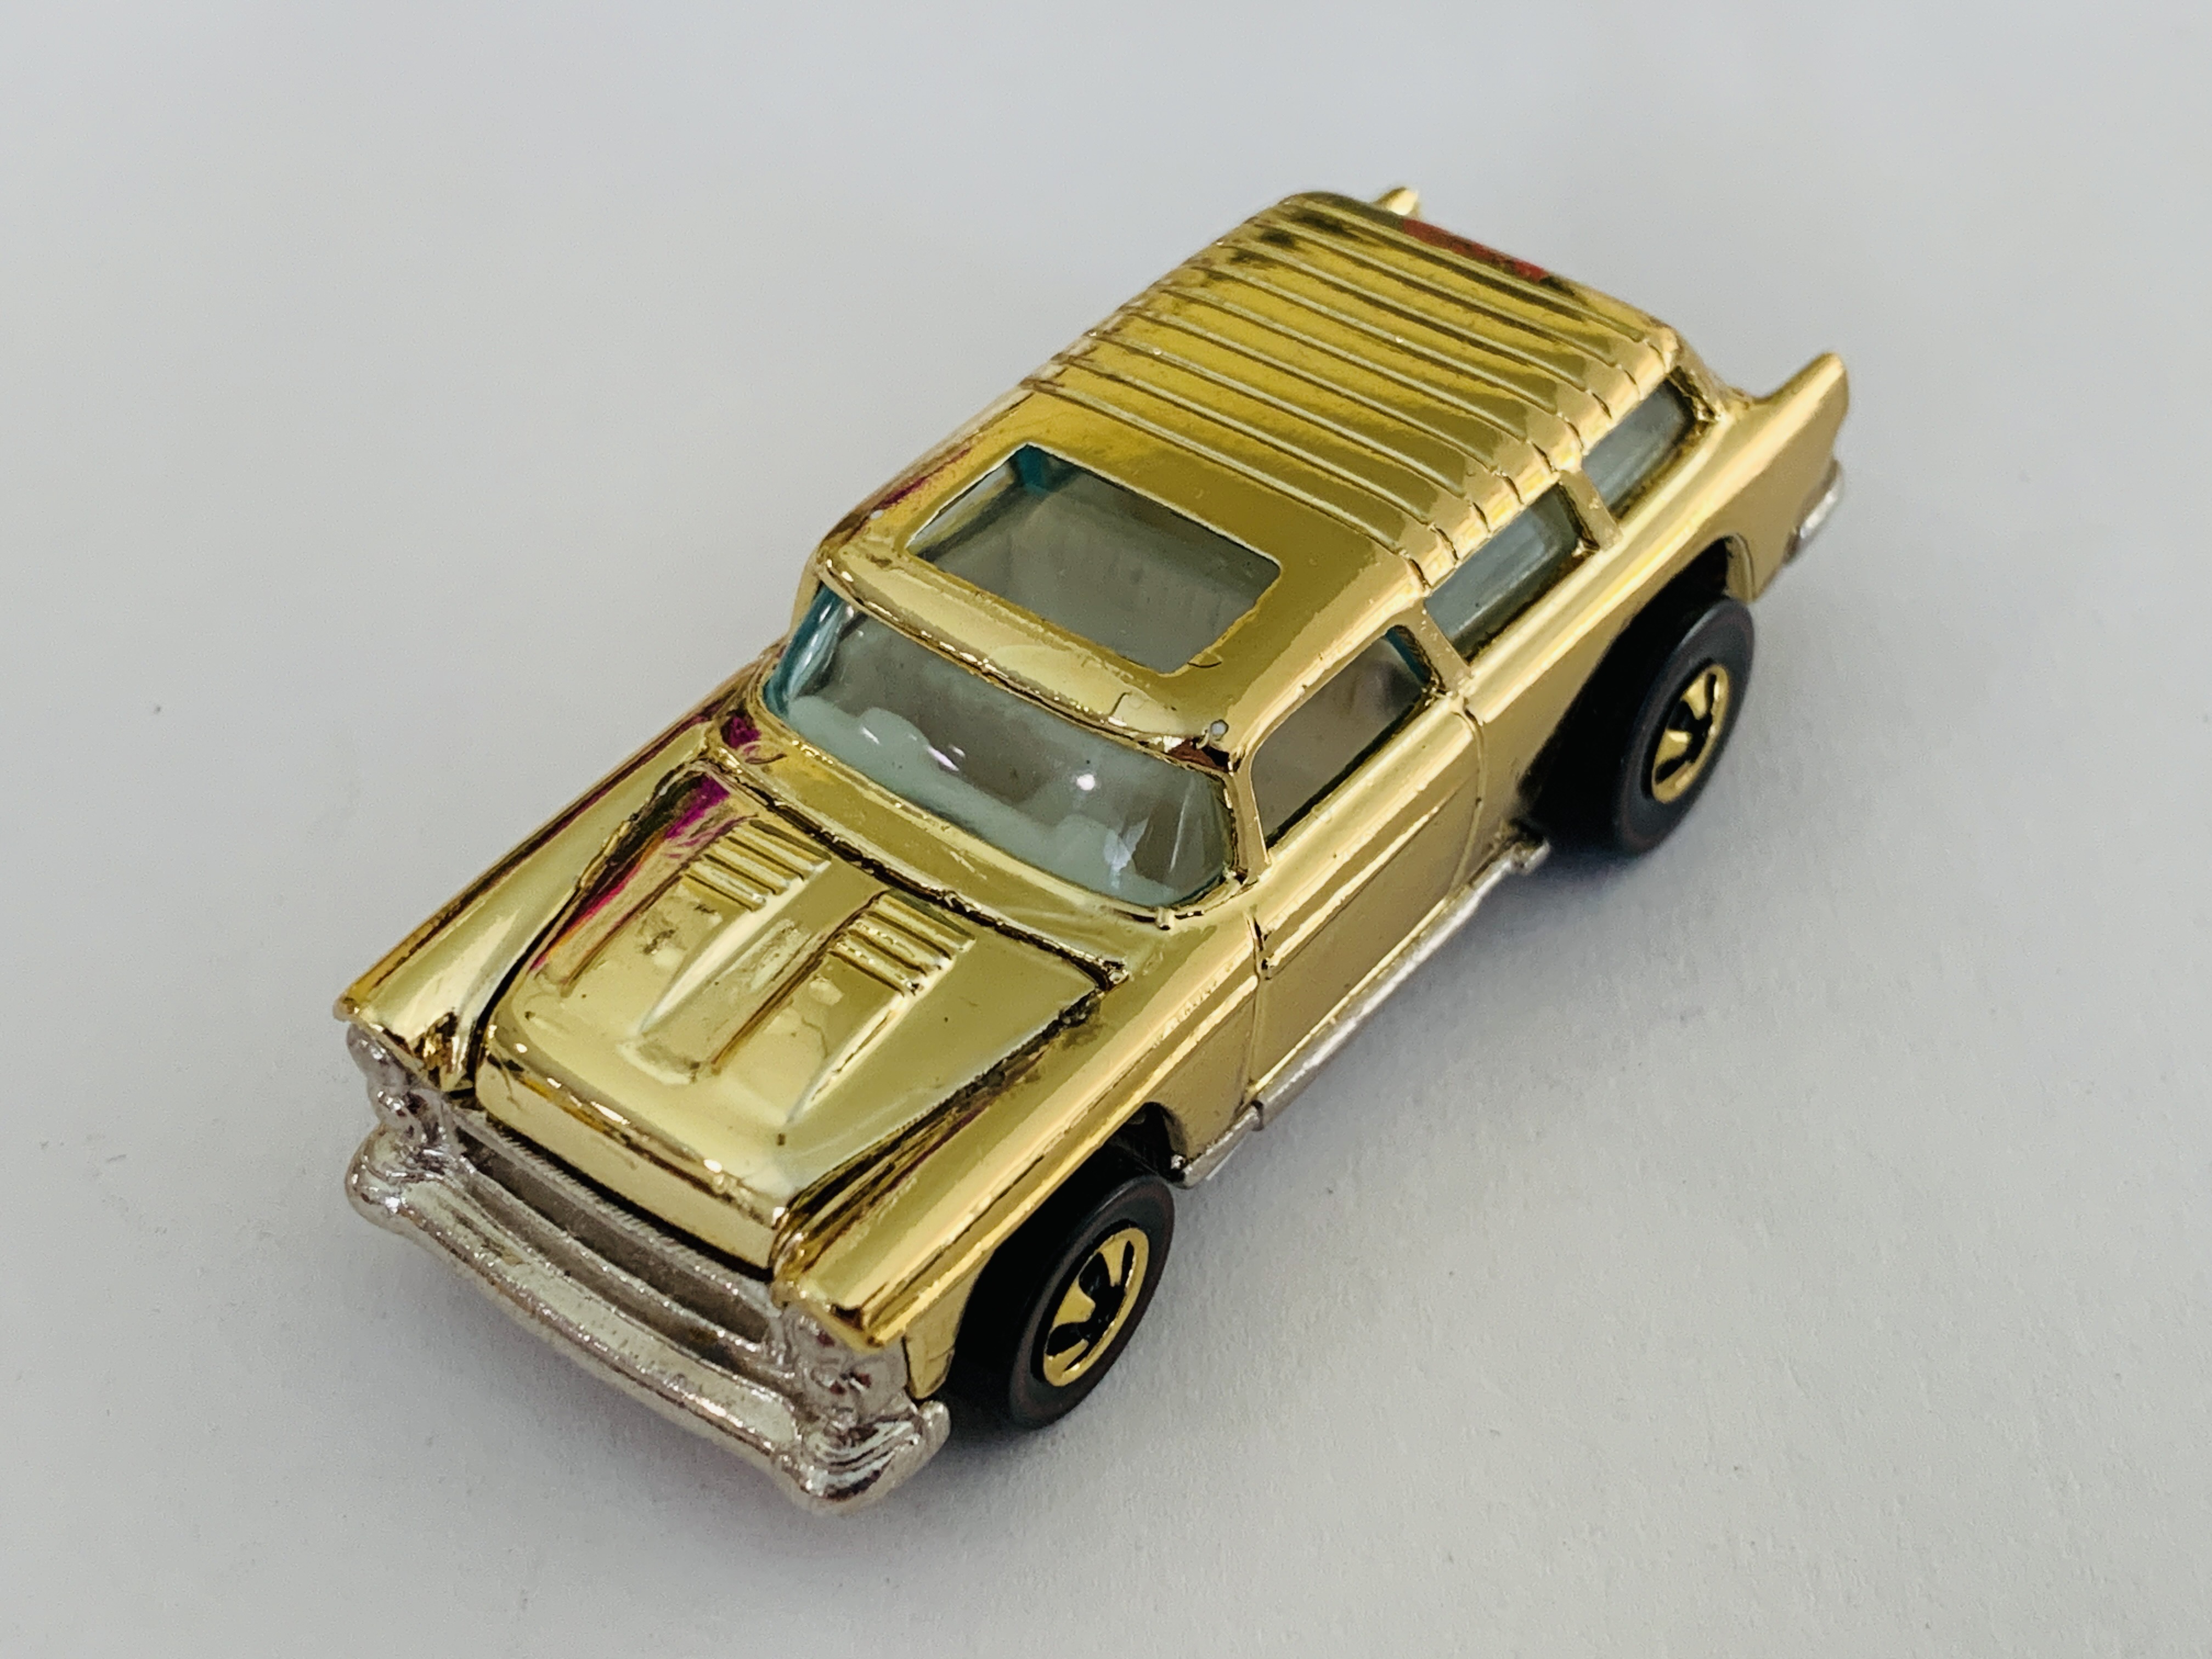 Hot Wheels FAO Schwarz Gold Series Classic Nomad